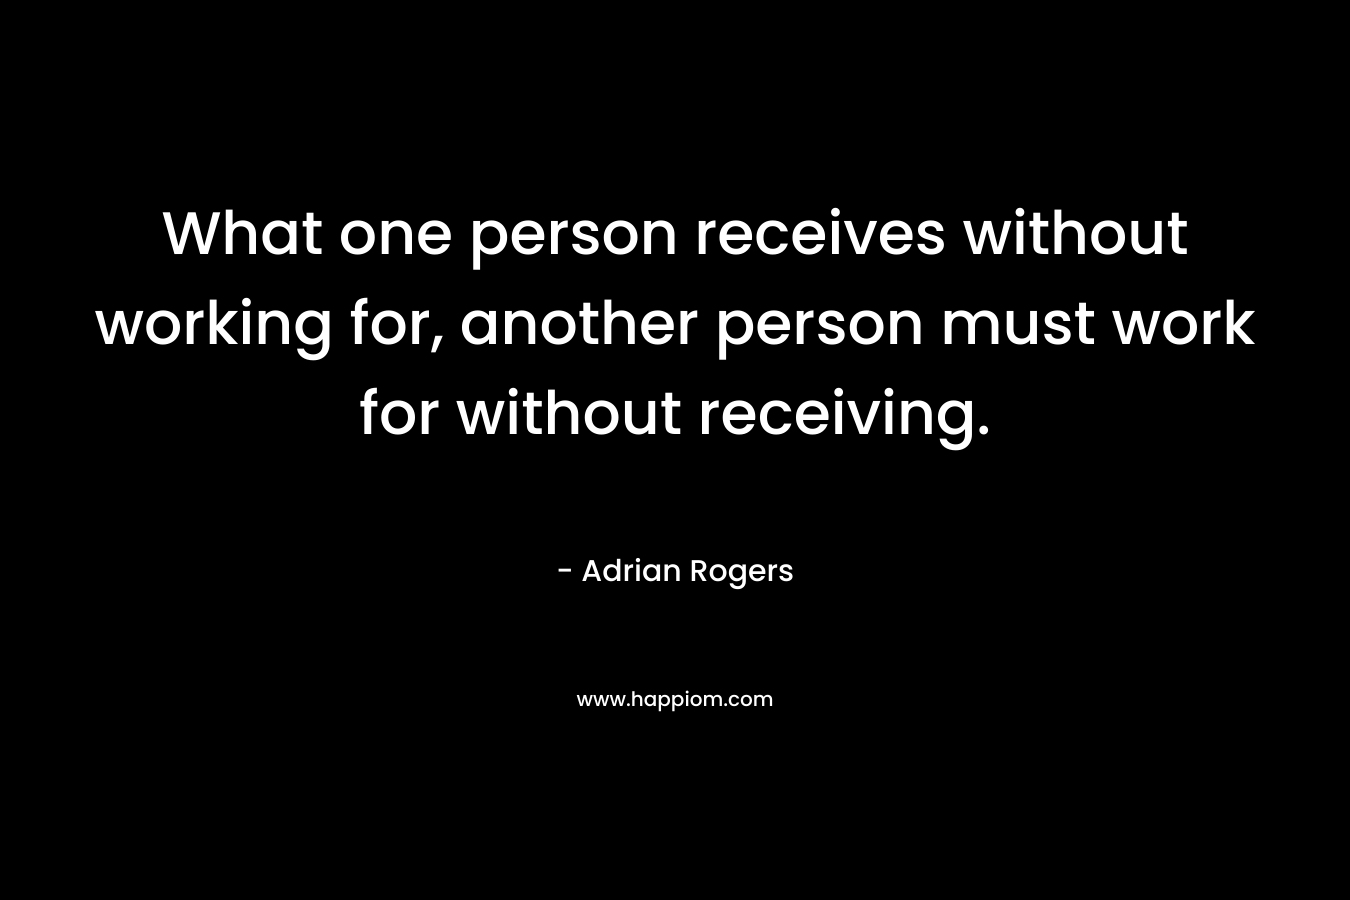 What one person receives without working for, another person must work for without receiving. – Adrian Rogers